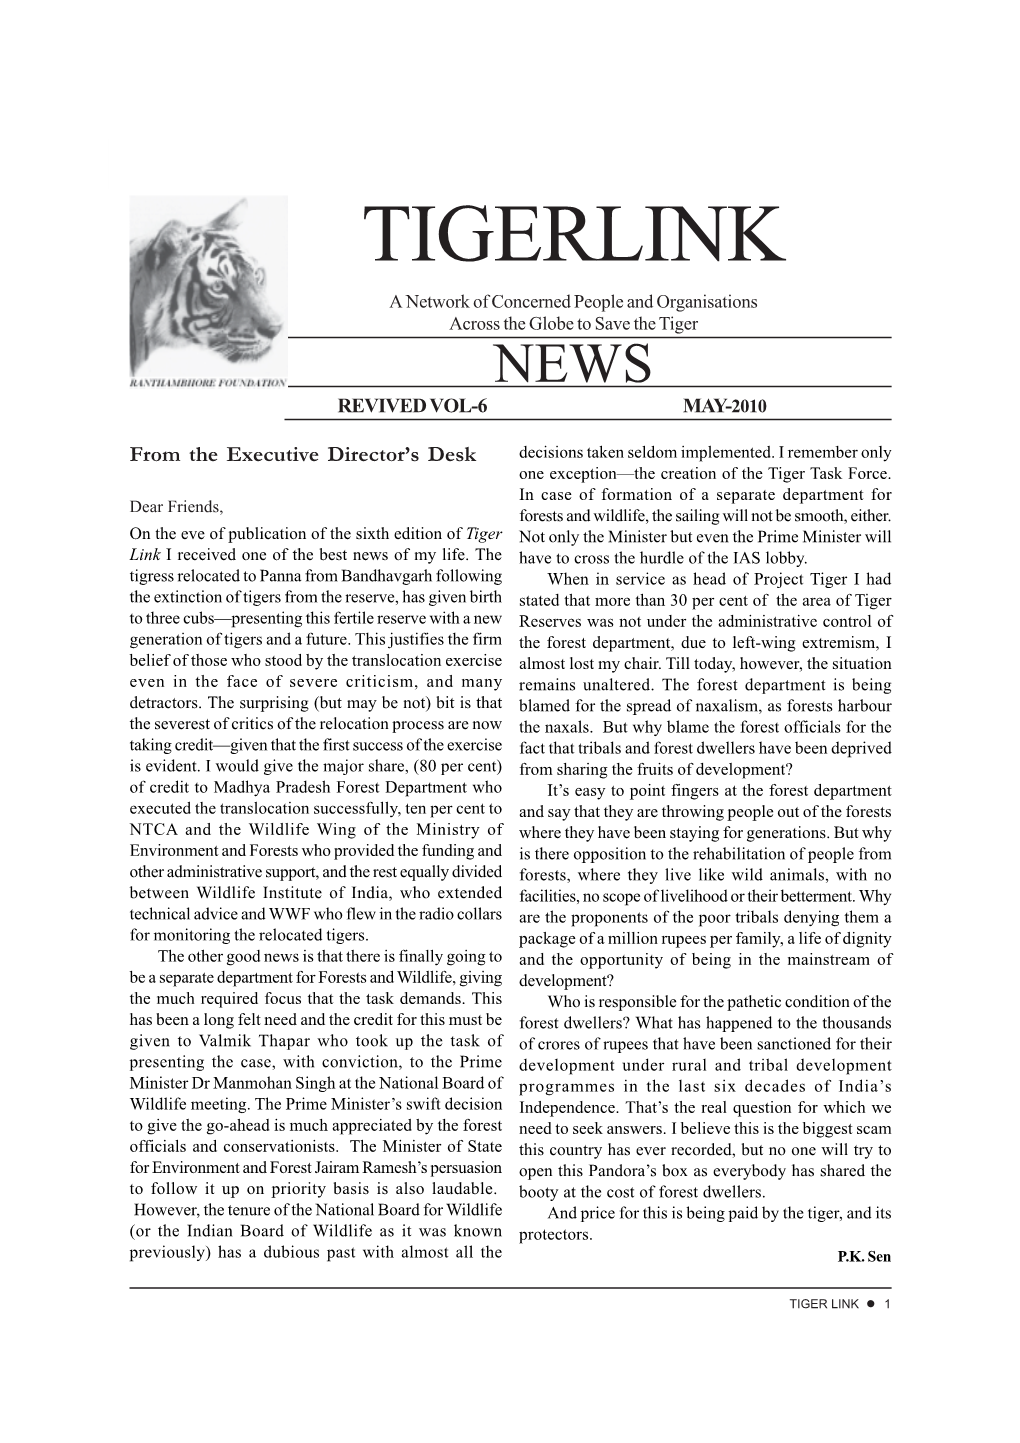 TIGER LINK Z 1 !"#$%&#'( Regulate Commercial and Tourism Interests Impinging on Tiger Habitat and to Notify Buffers